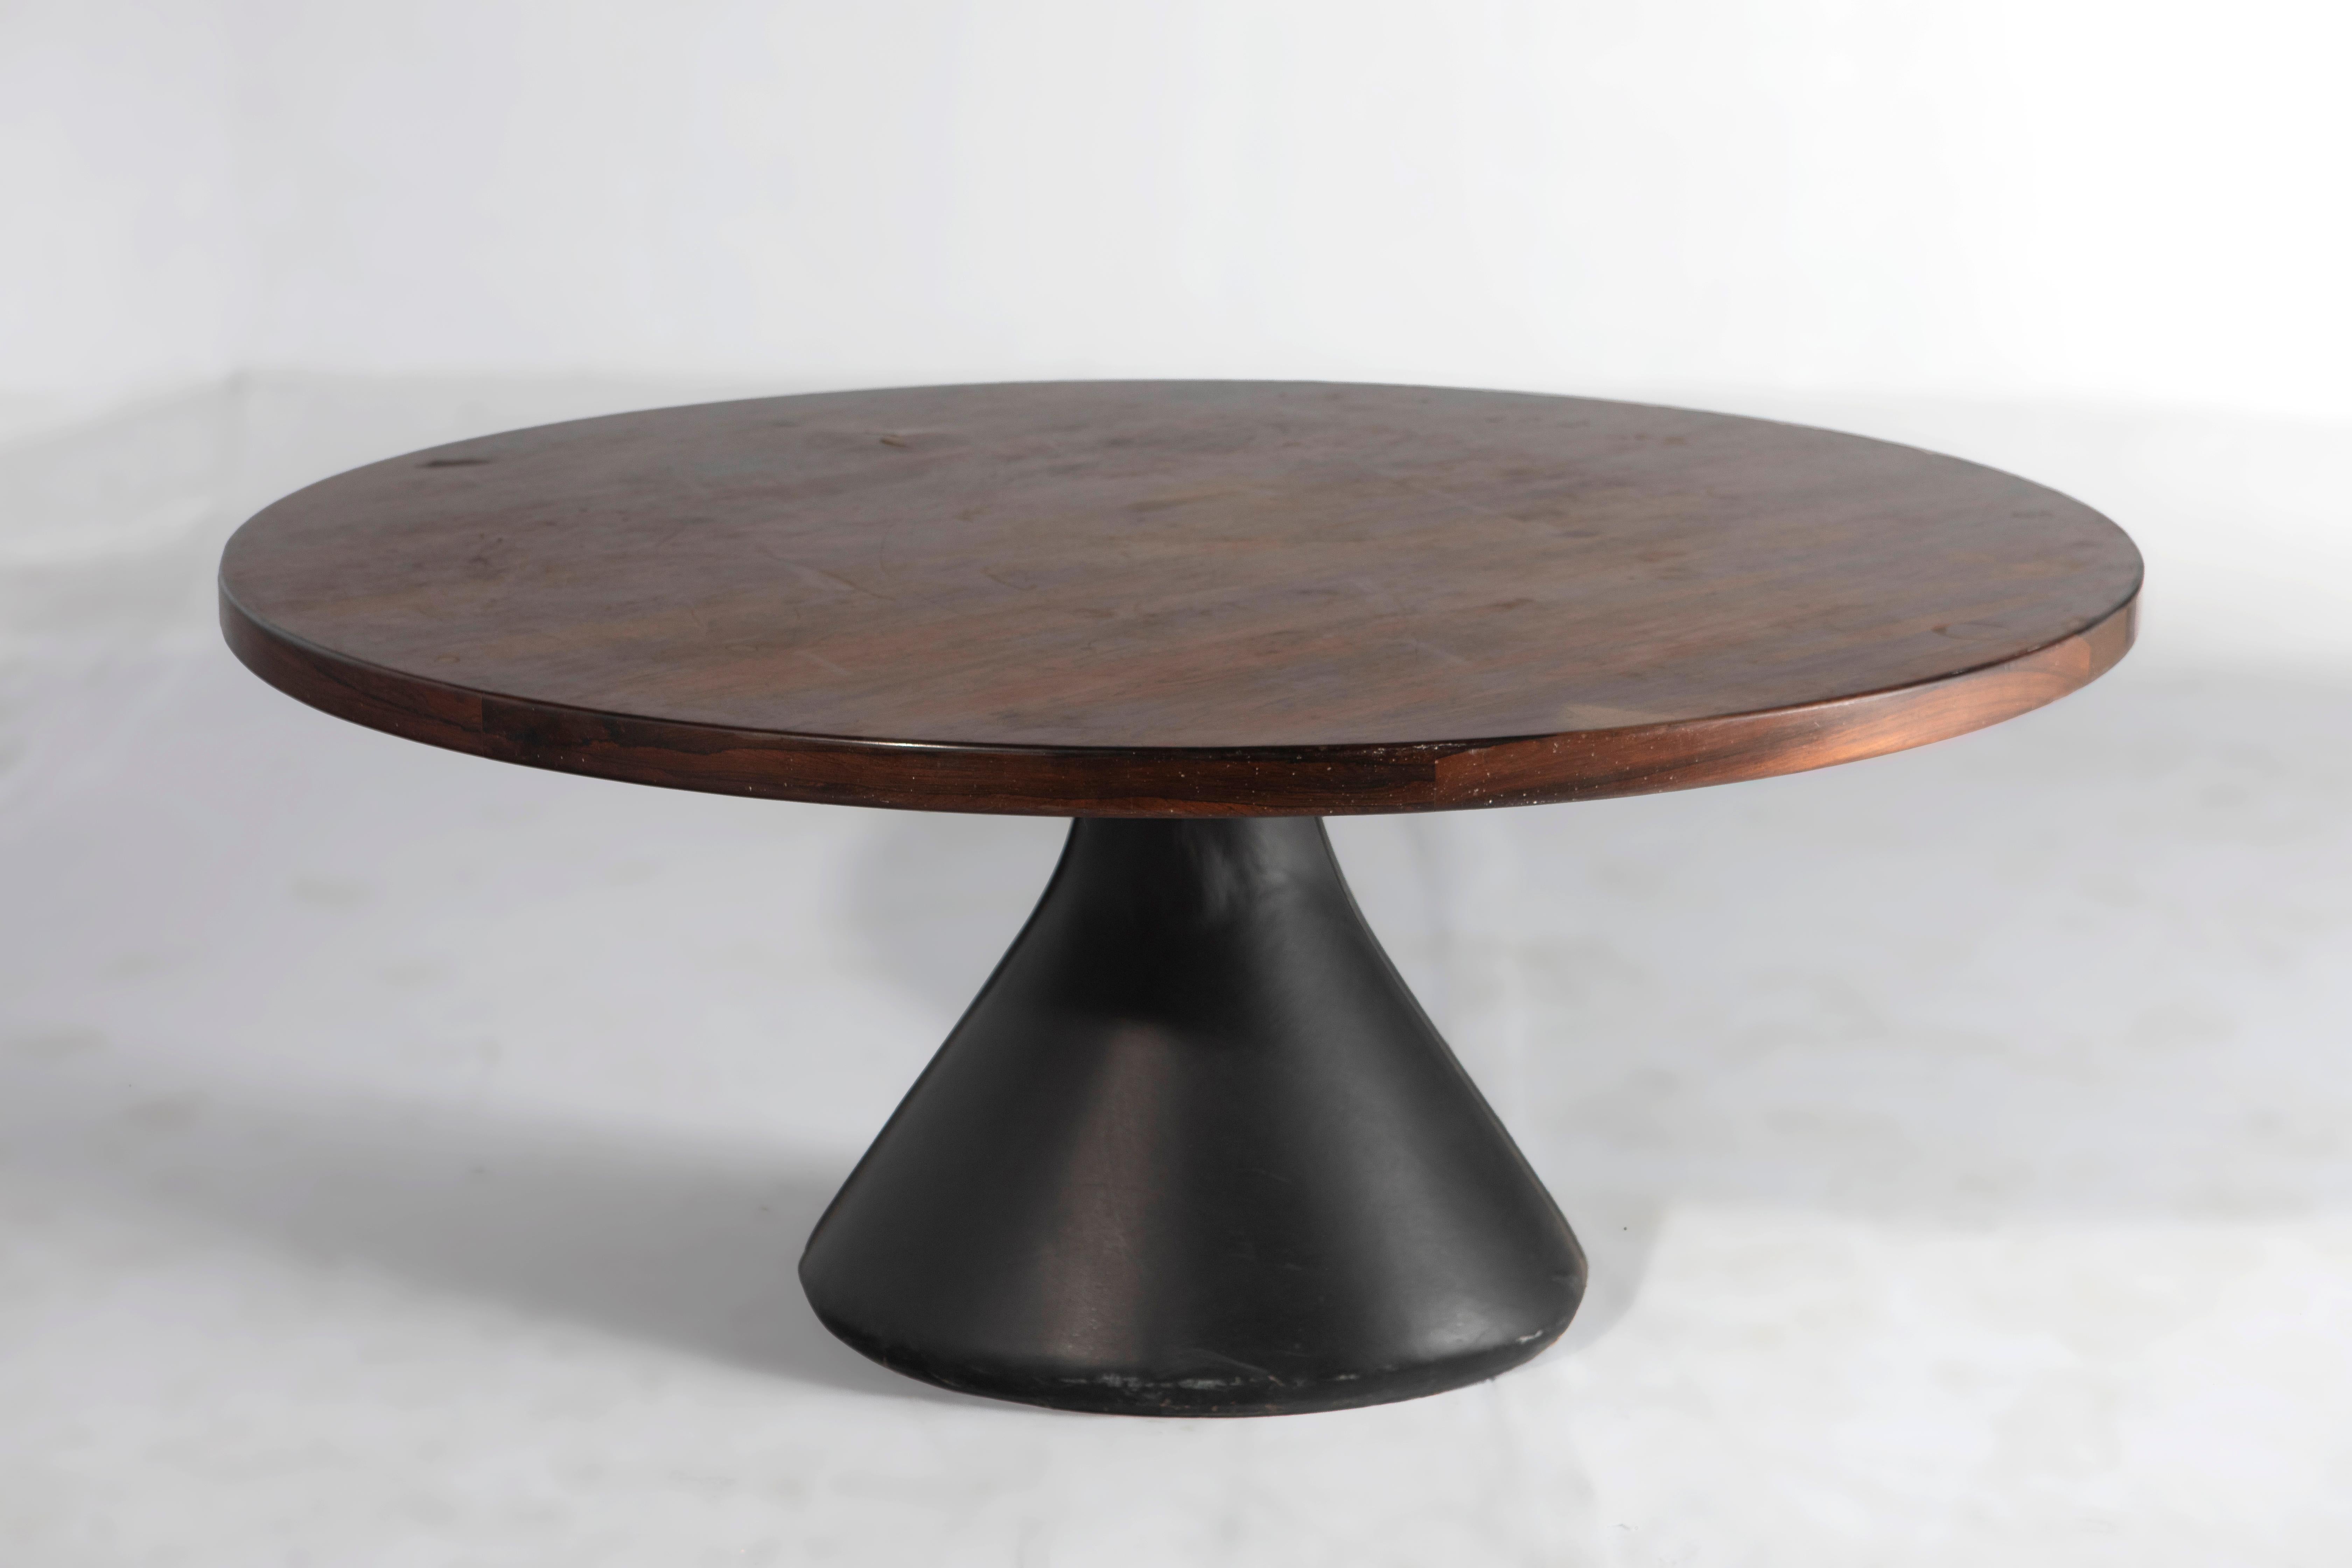 Mid-Century Modern 'Guarujá' Table by Jorge Zalszupin, Brazil, 1960s

The iconic 'Guarujá' is a table designed by Jorge Zalszupin and produced by his company, L'atelier.
The table-top is made of wood veneer, which provides a durable and beautiful